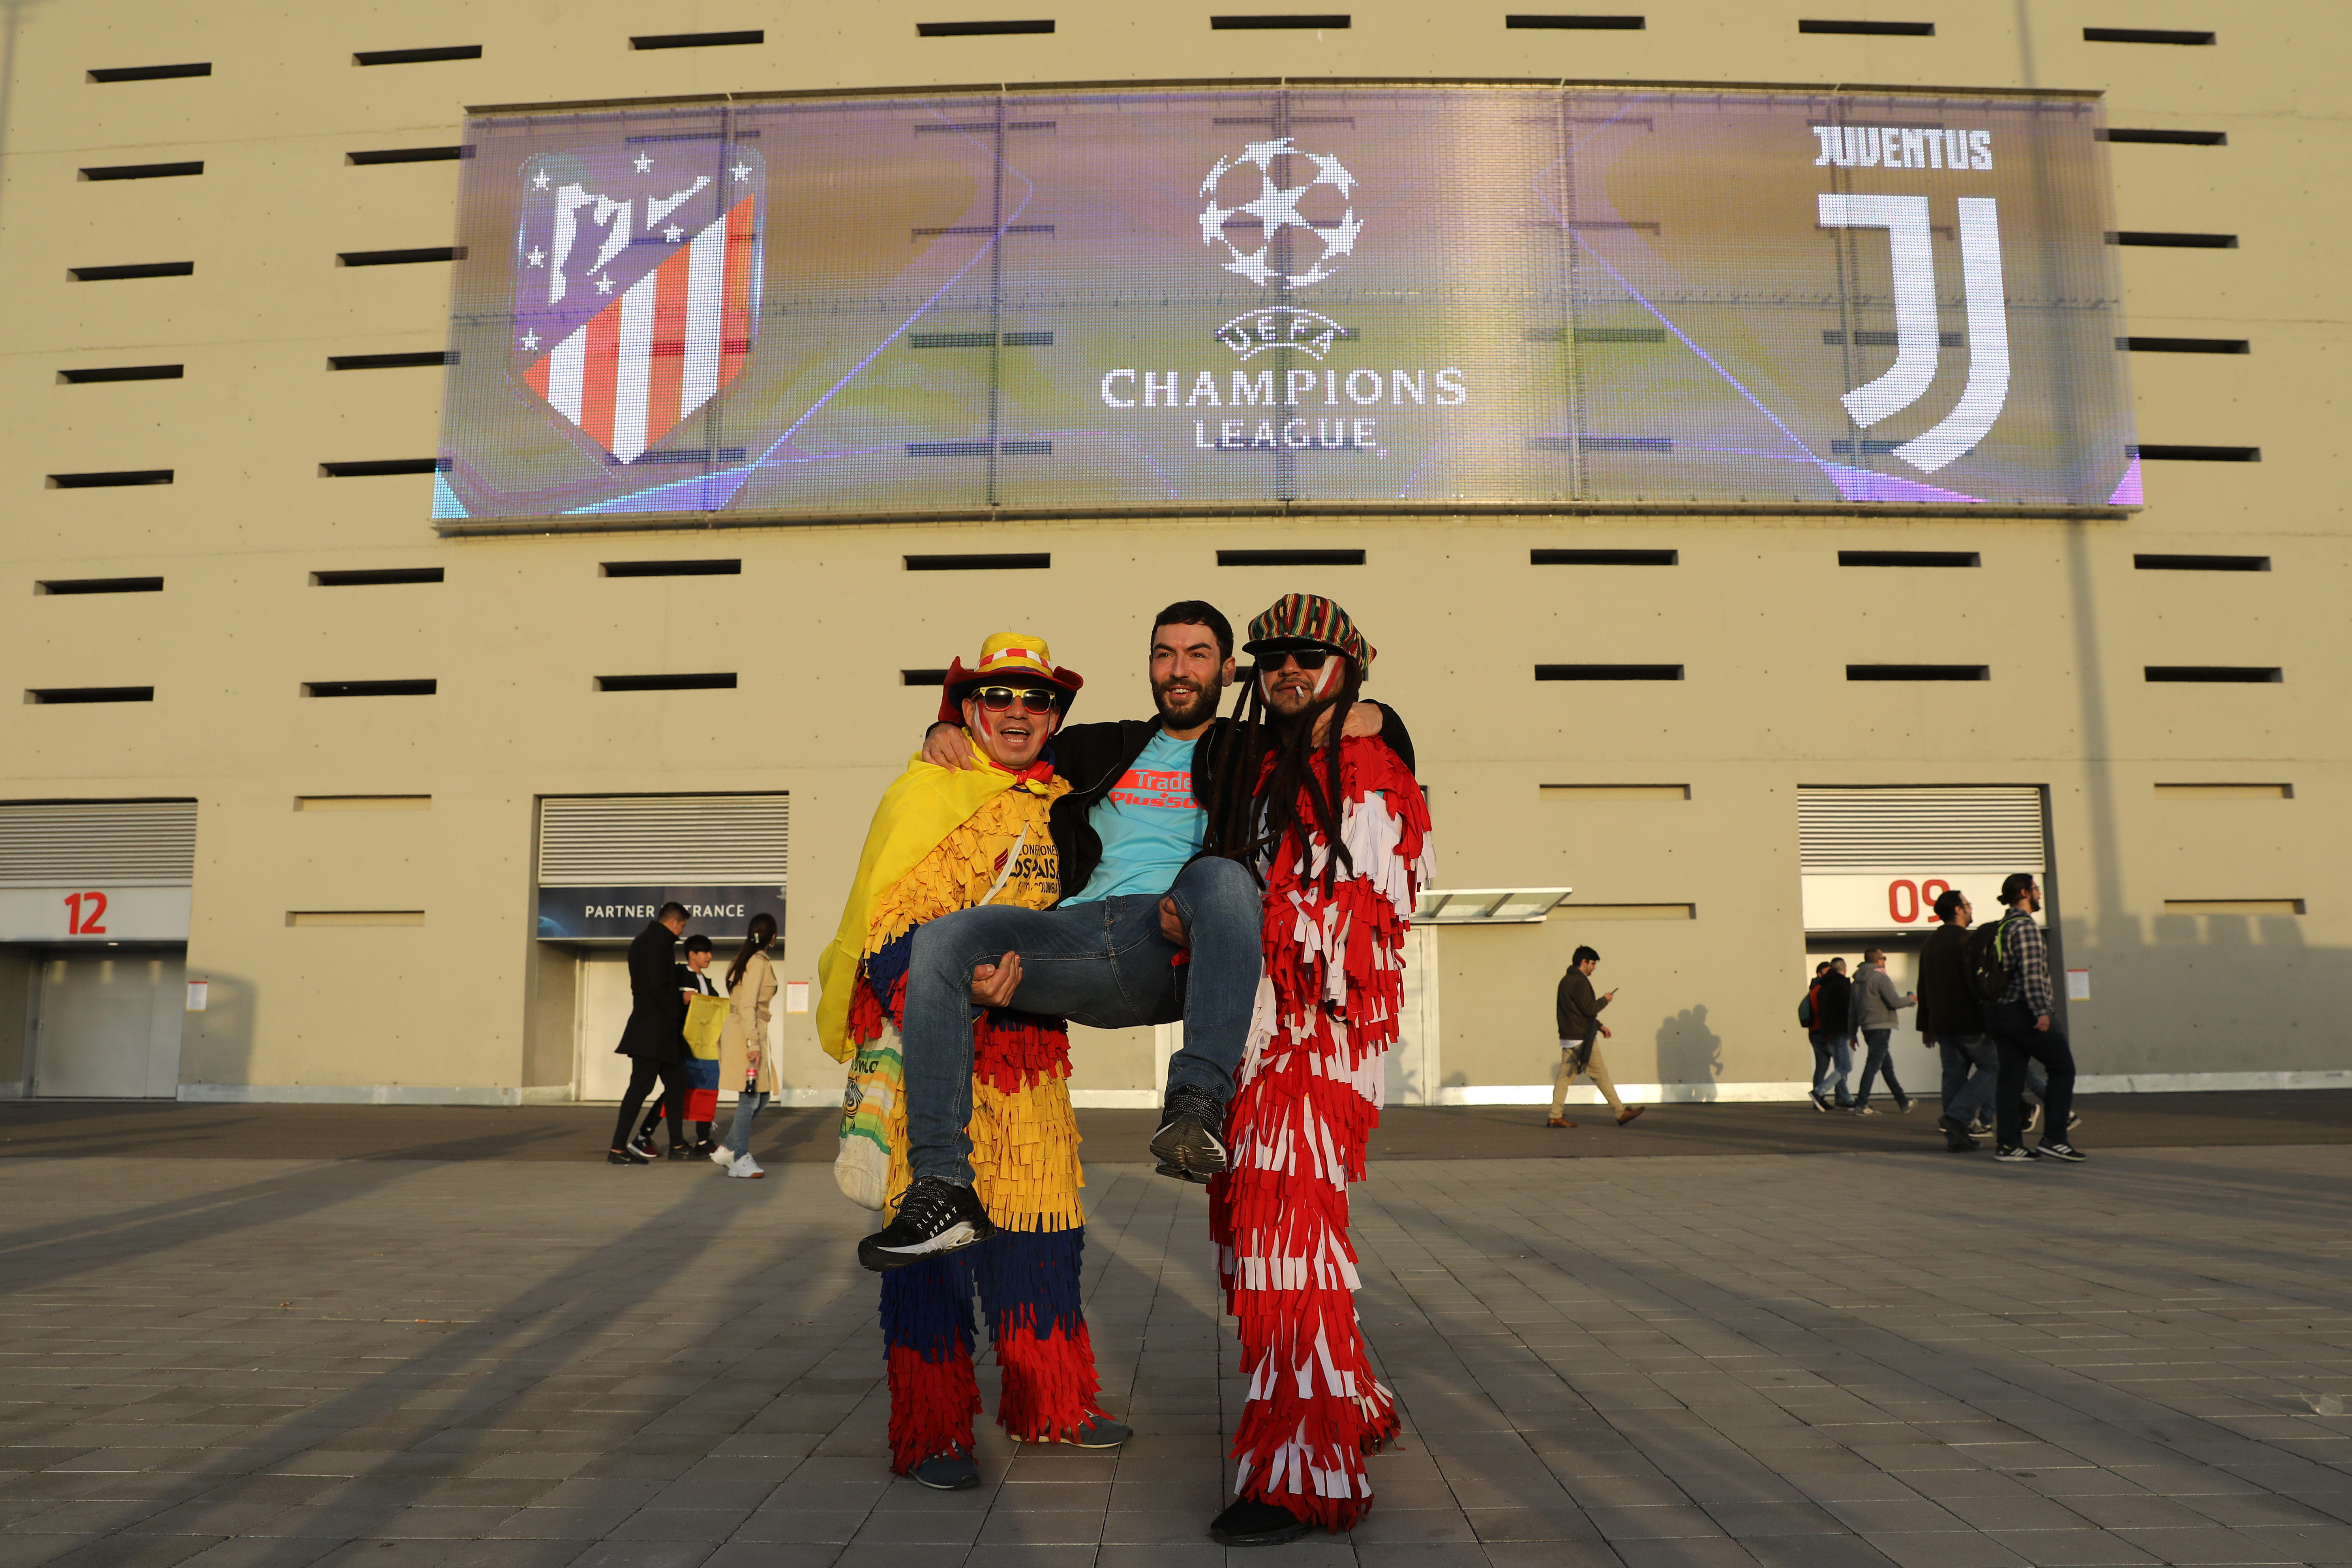 MADRID, SPAIN - FEBRUARY 20: Fans pose for a photo outside the stadium prior to the UEFA Champions League Round of 16 First Leg match between Club Atletico de Madrid and Juventus at Estadio Wanda Metropolitano on February 20, 2019 in Madrid, Spain.  (Photo by Gonzalo Arroyo Moreno/Getty Images)